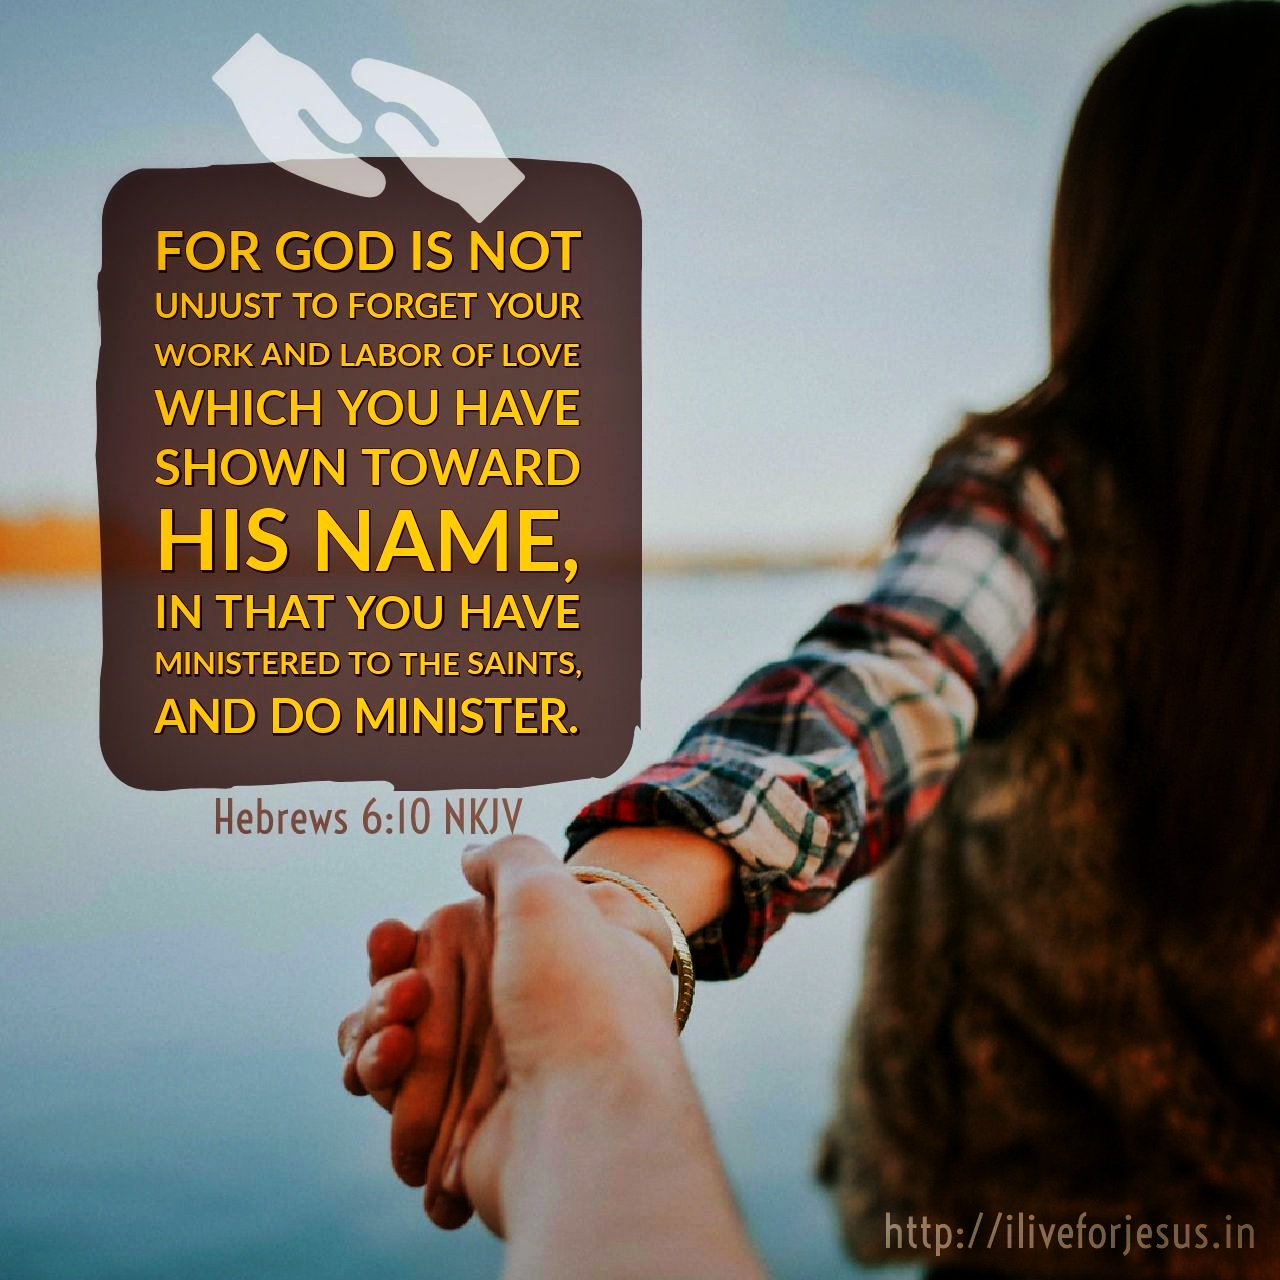 For God is not unjust to forget your work and labor of love which you have shown toward His name, in  that you have ministered to the saints, and do minister. Hebrews 6:10 NKJV